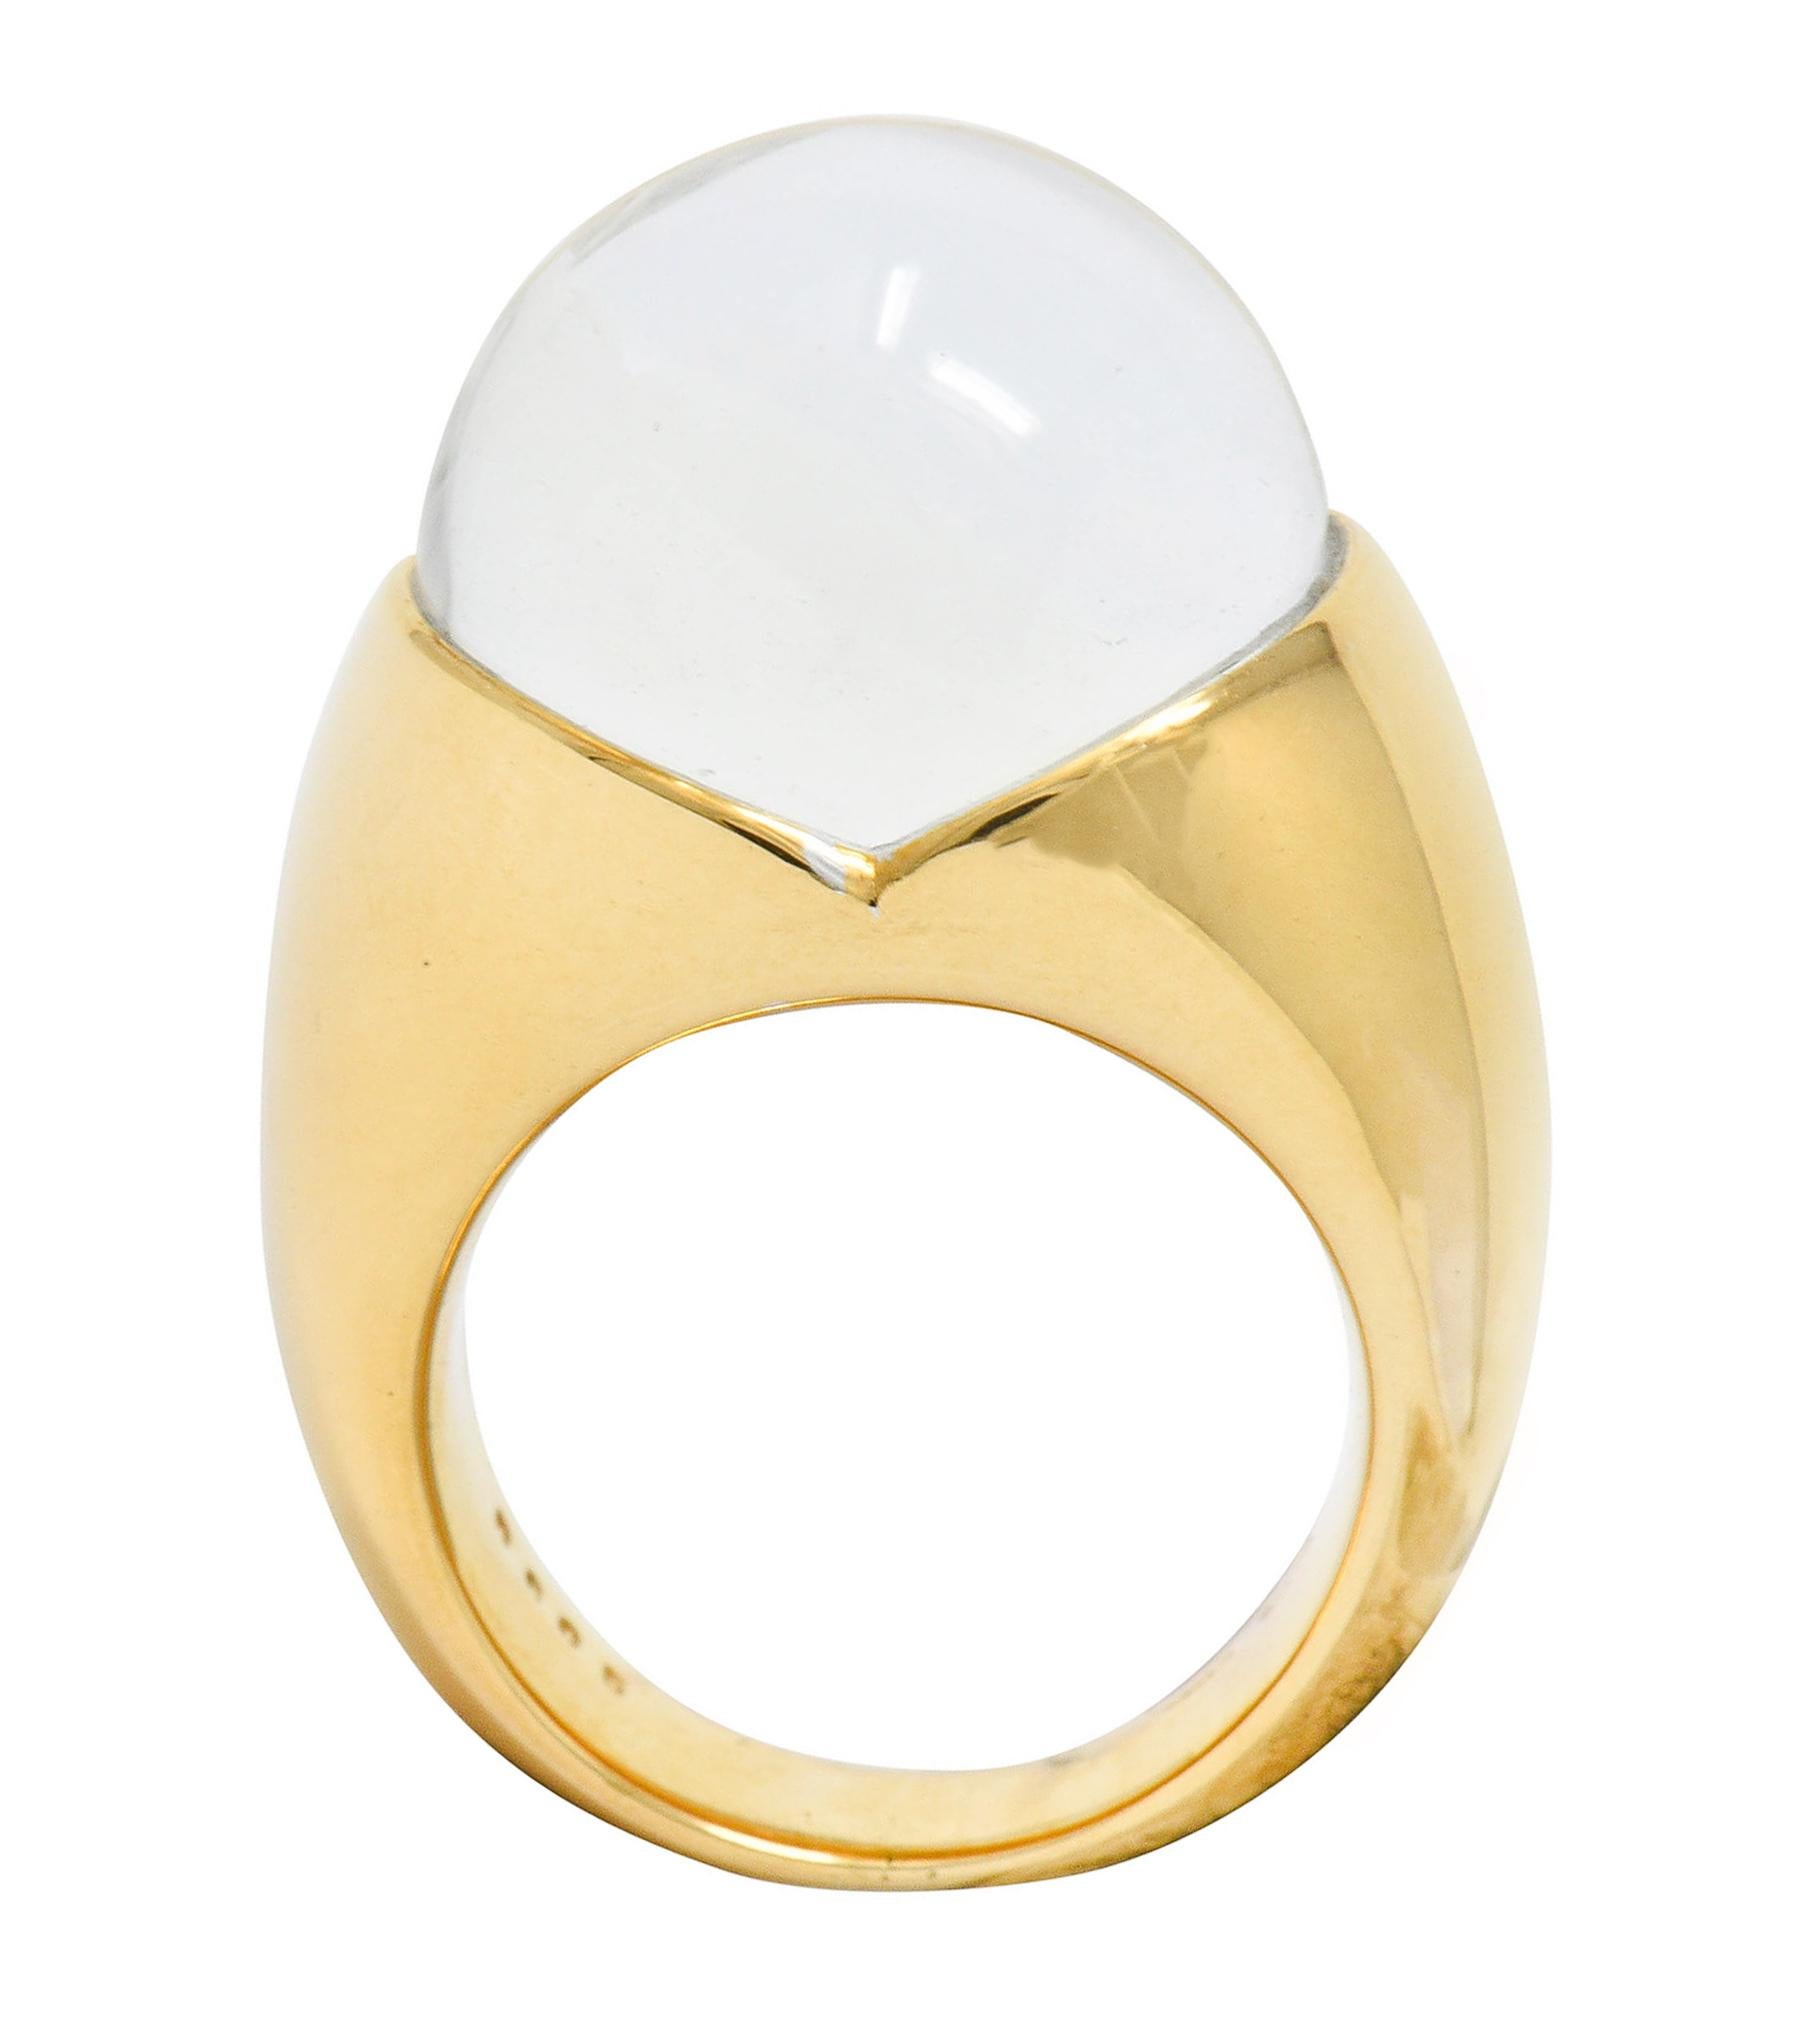 Featuring a rock crystal sphere measuring approximately 15.6 mm

Nestled securely in a high polished gold mounting atop a flush set round brilliant cut diamond

Its size is magnified through the well polished and transparent rock crystal

Stamped